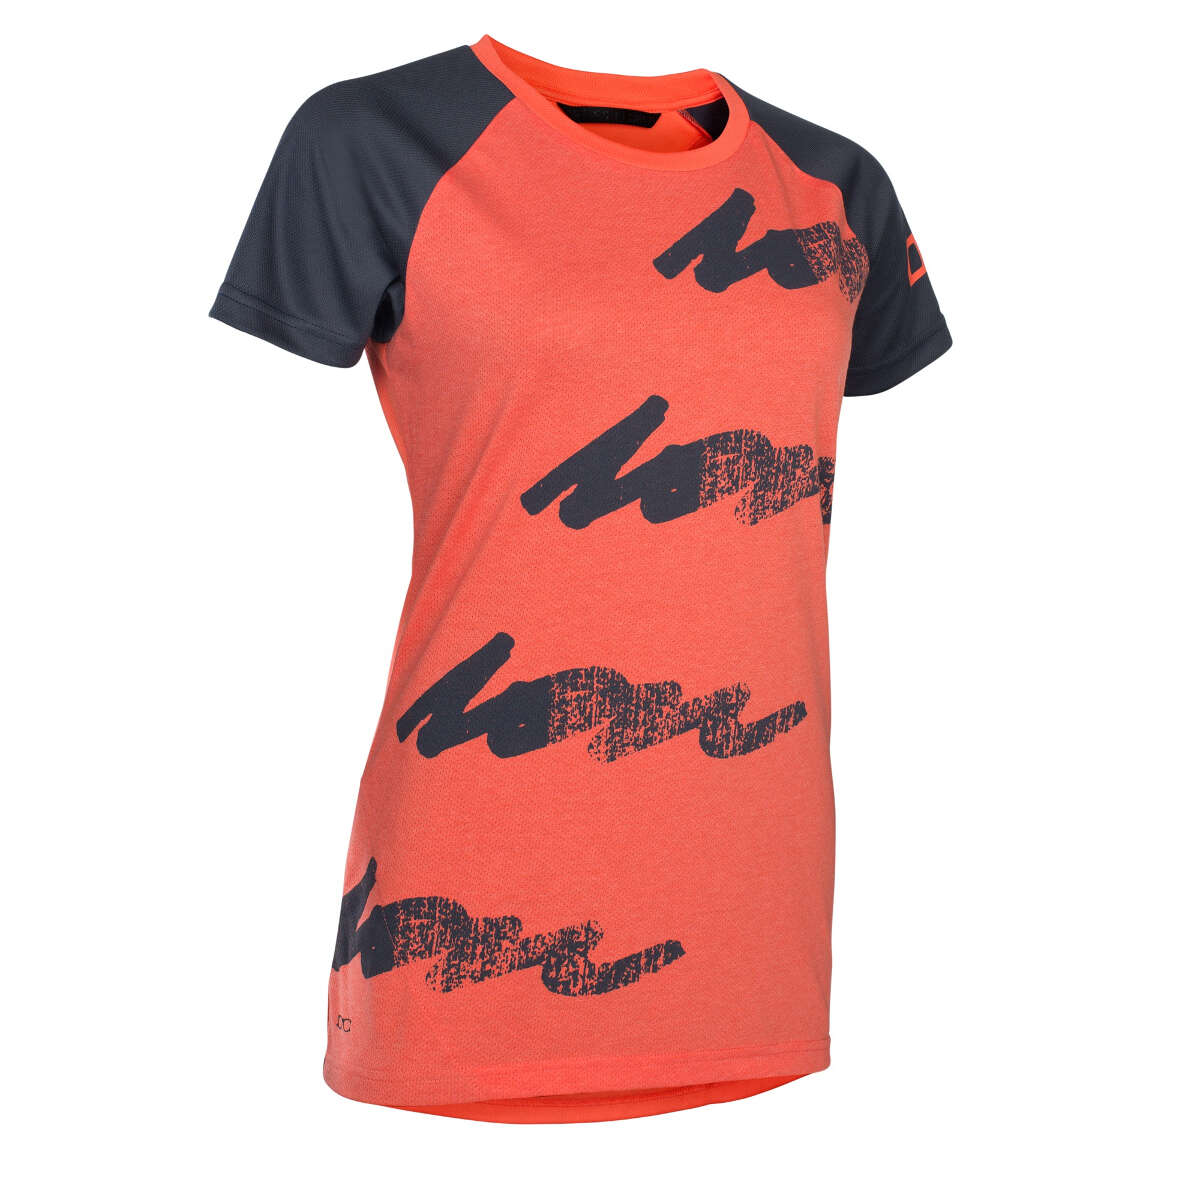 ION Femme Maillot VTT Manches Courtes Scrub Amp Hot Coral